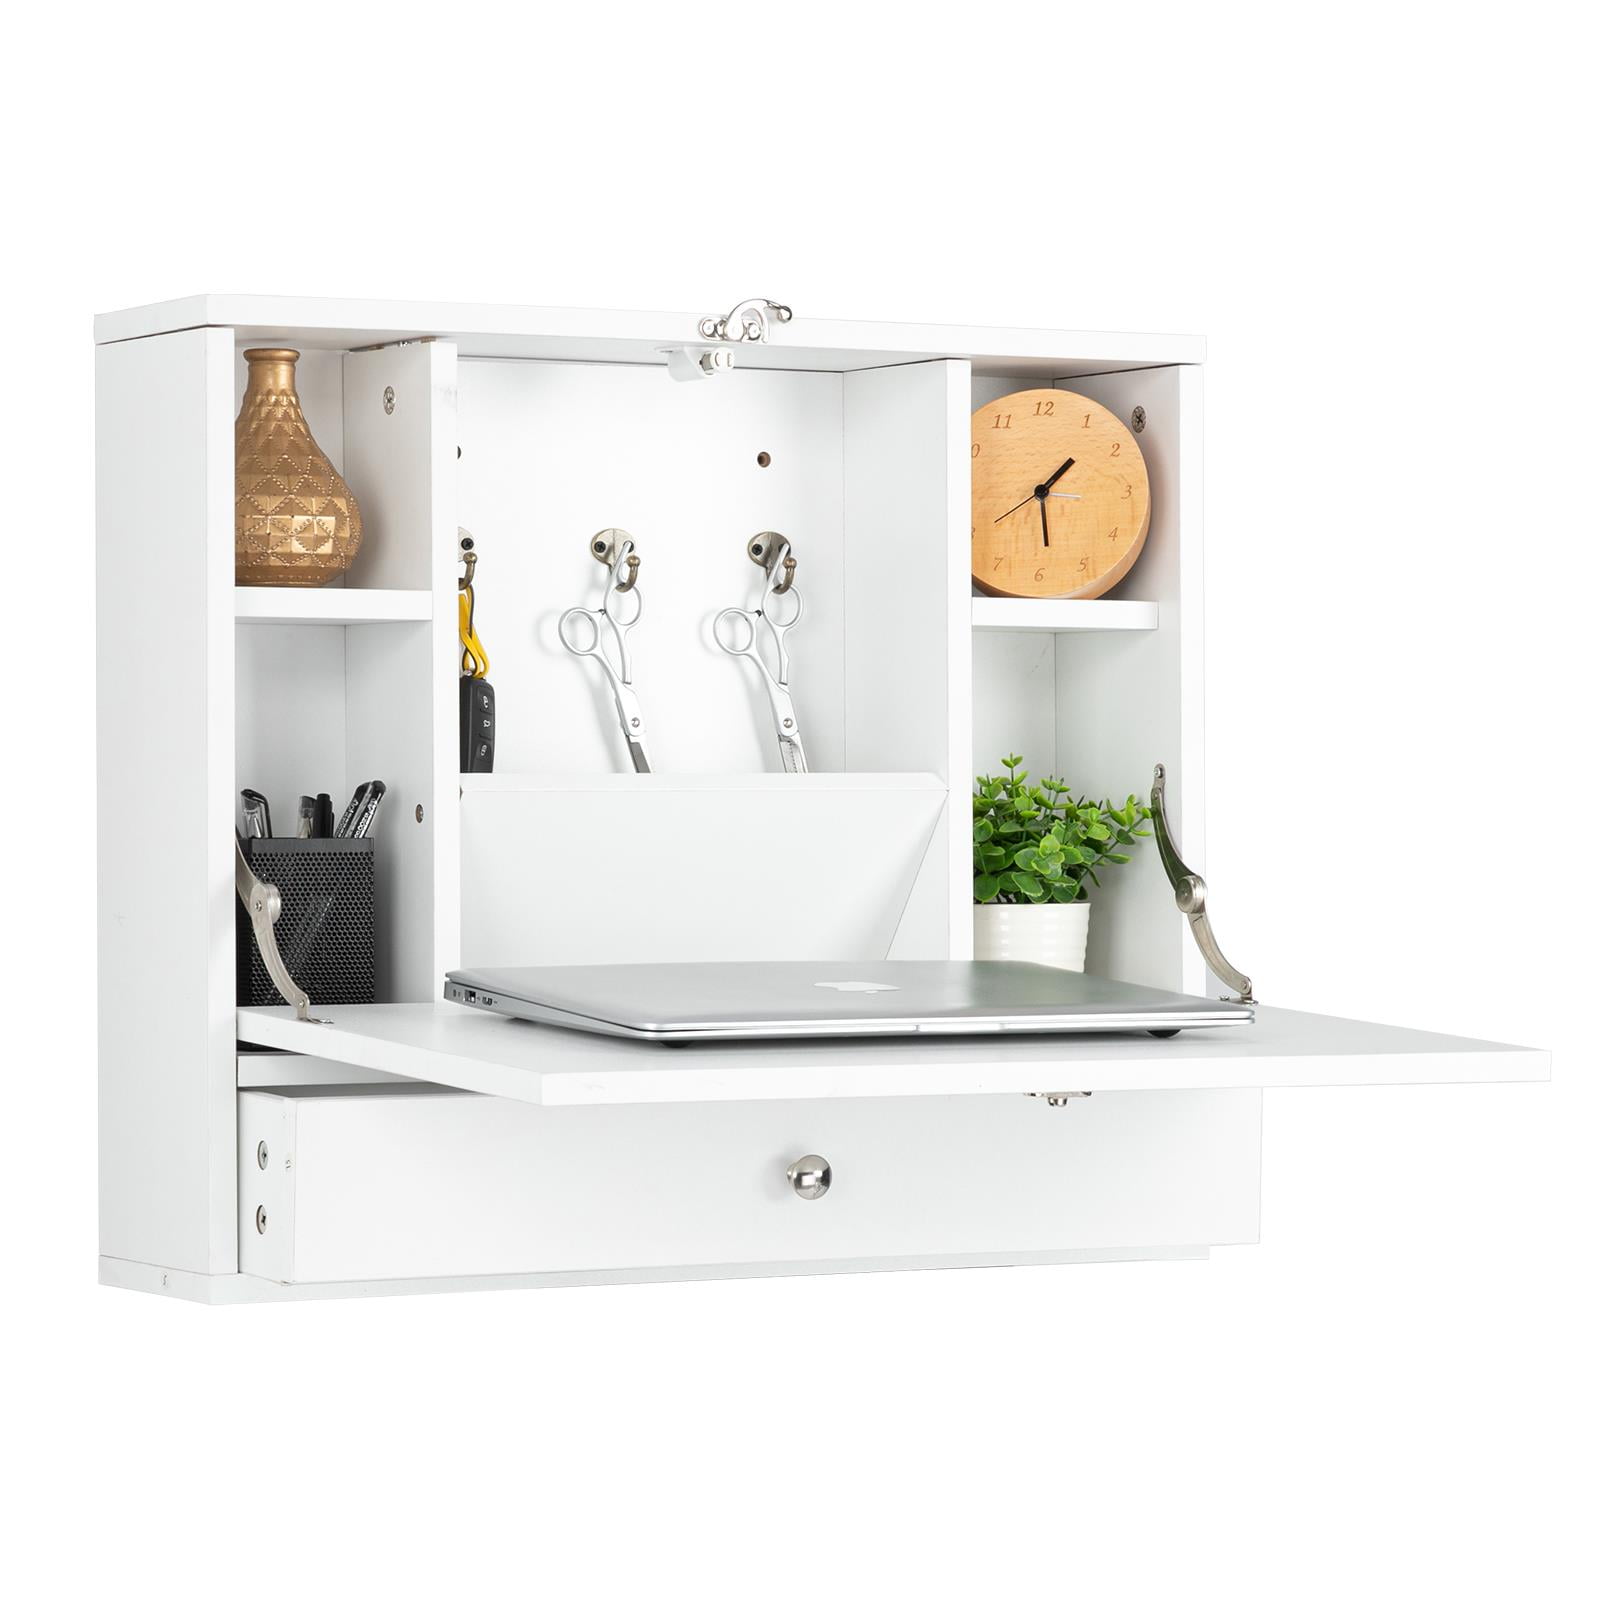 White Wooden Hanging House Shelf Display Unit Floating Home Storage Kid's Room 